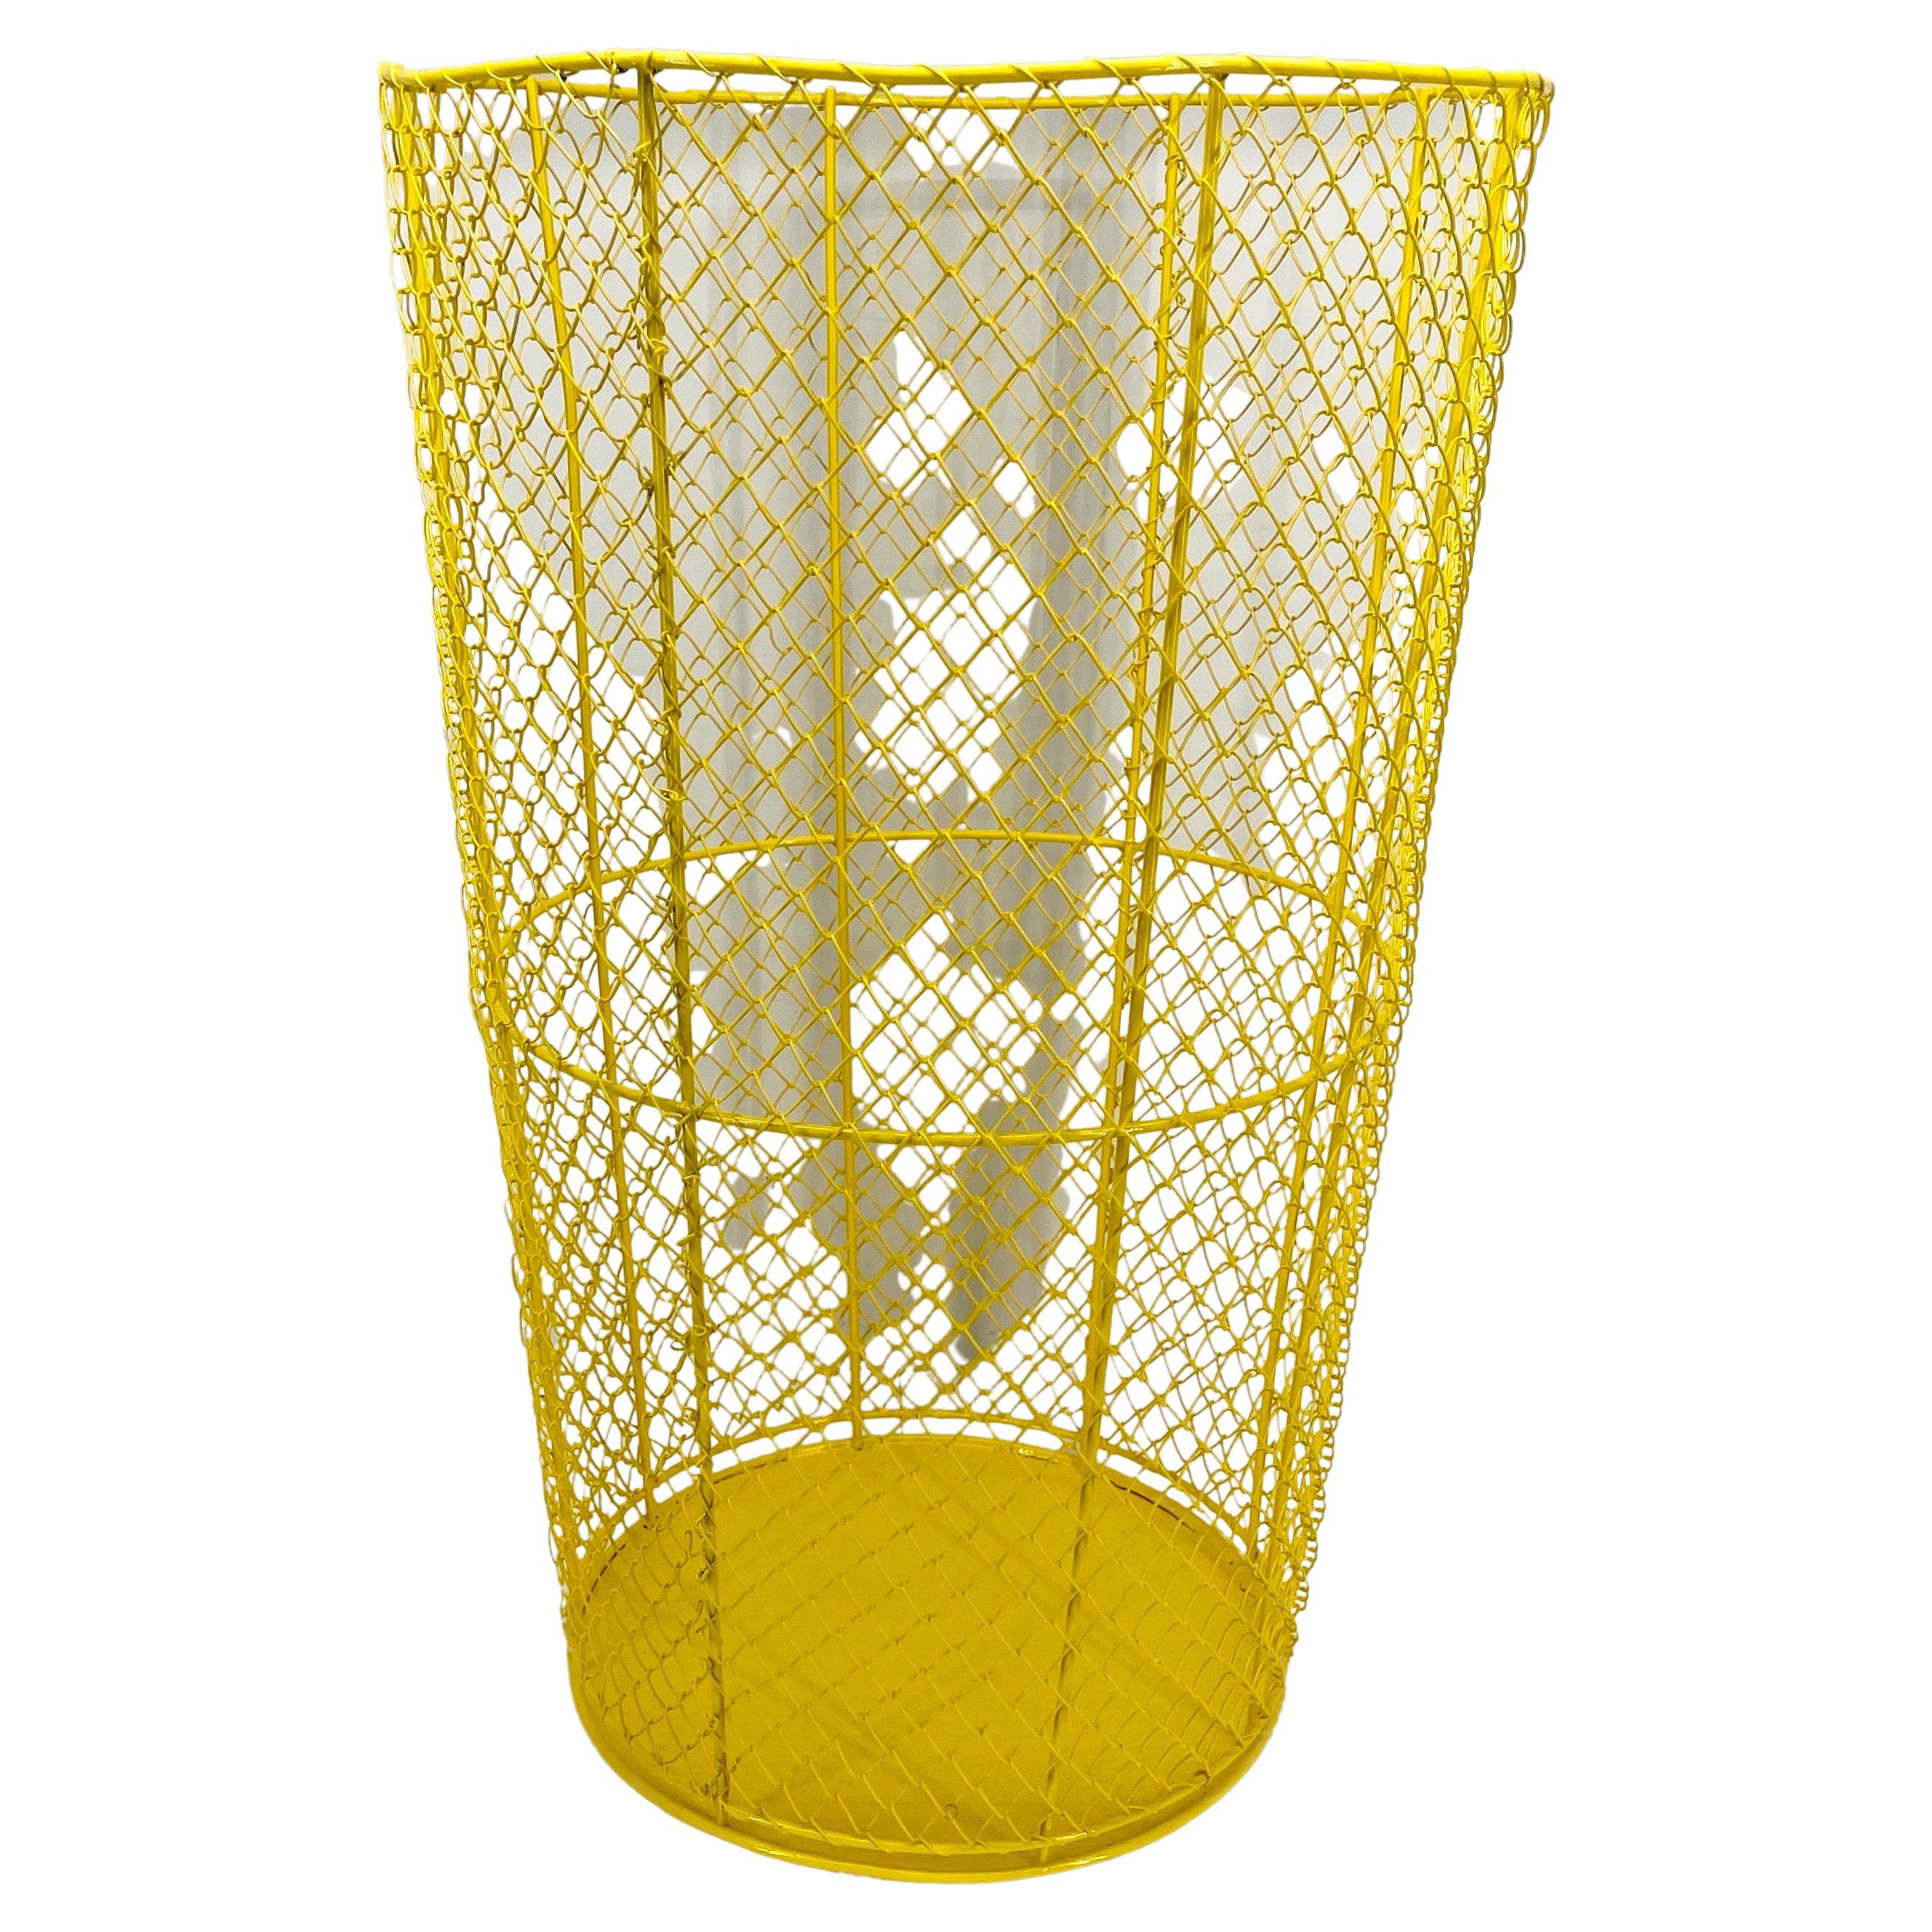 Powder-Coated Mid-Century Modern Metal Hamper or Trash Can, Powder Coated Yellow For Sale